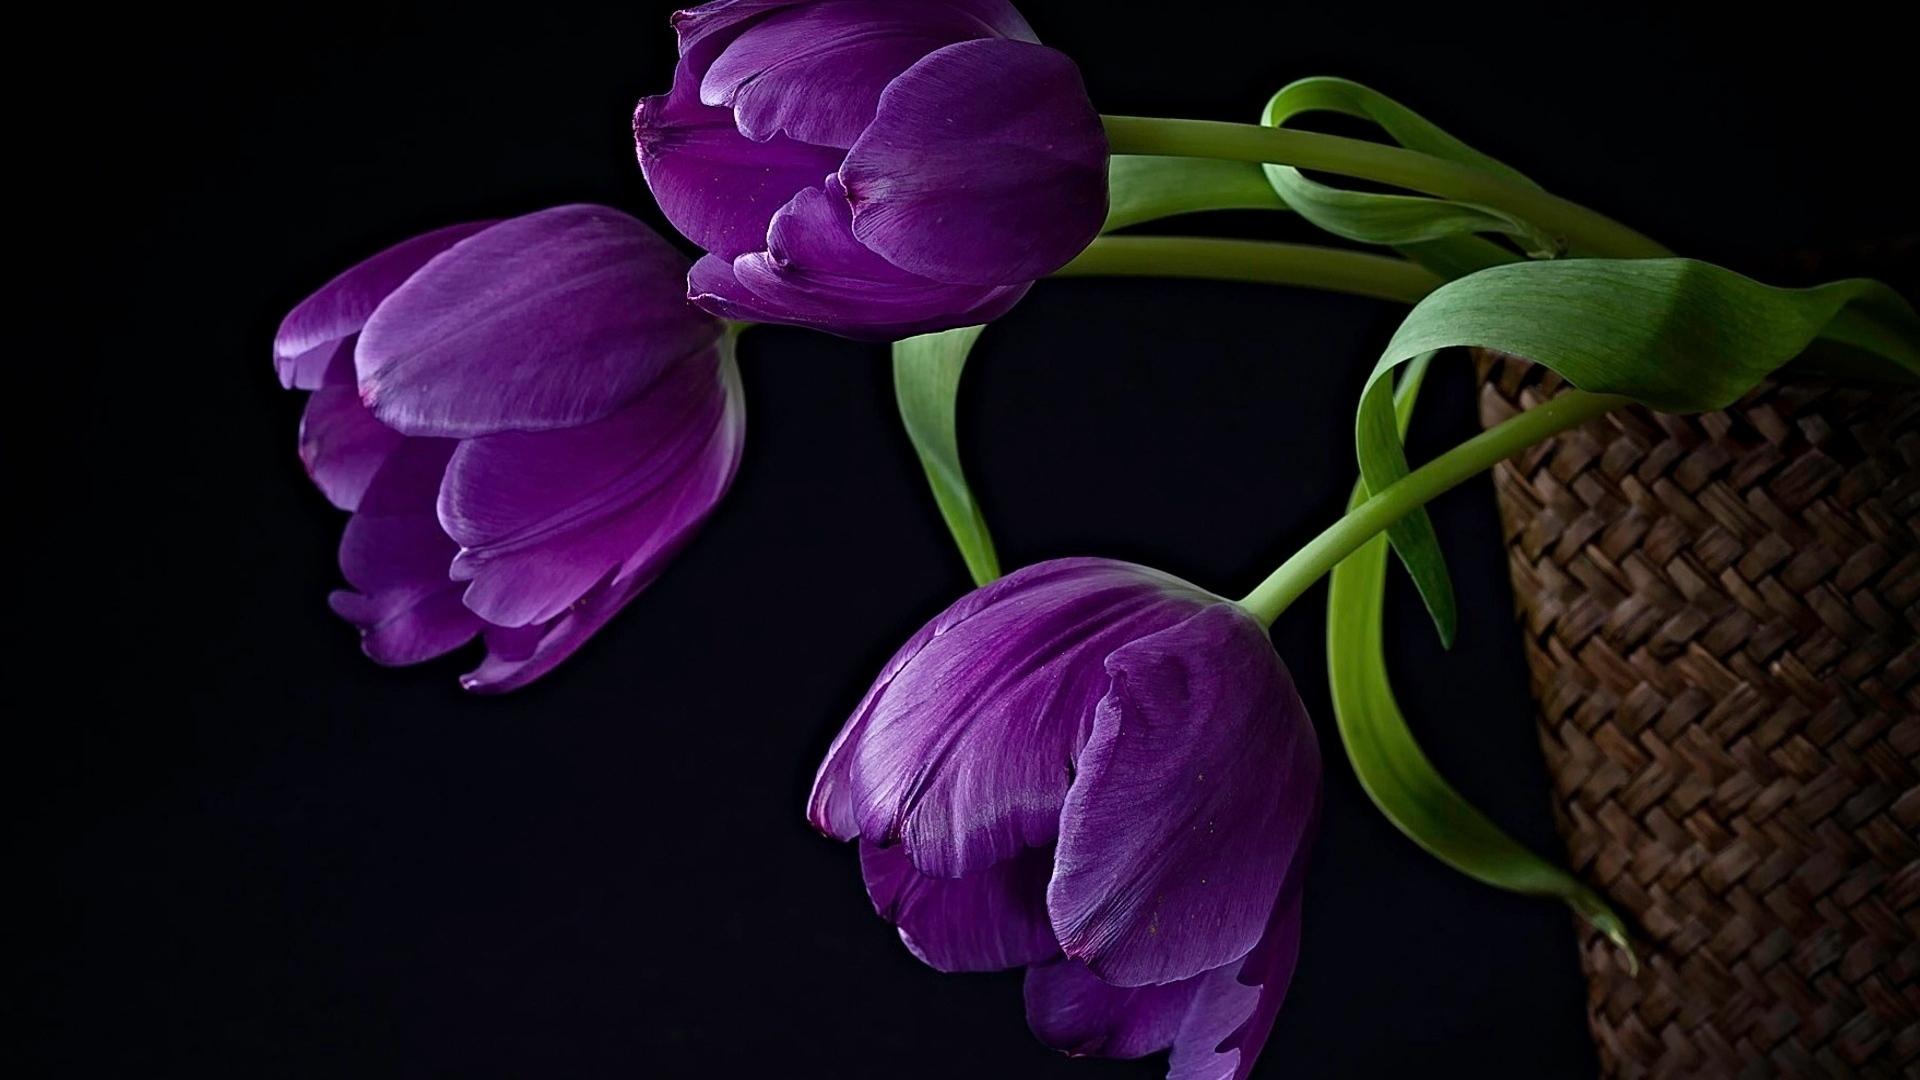 Purple Tulips in Basket with Black Background Wallpaper